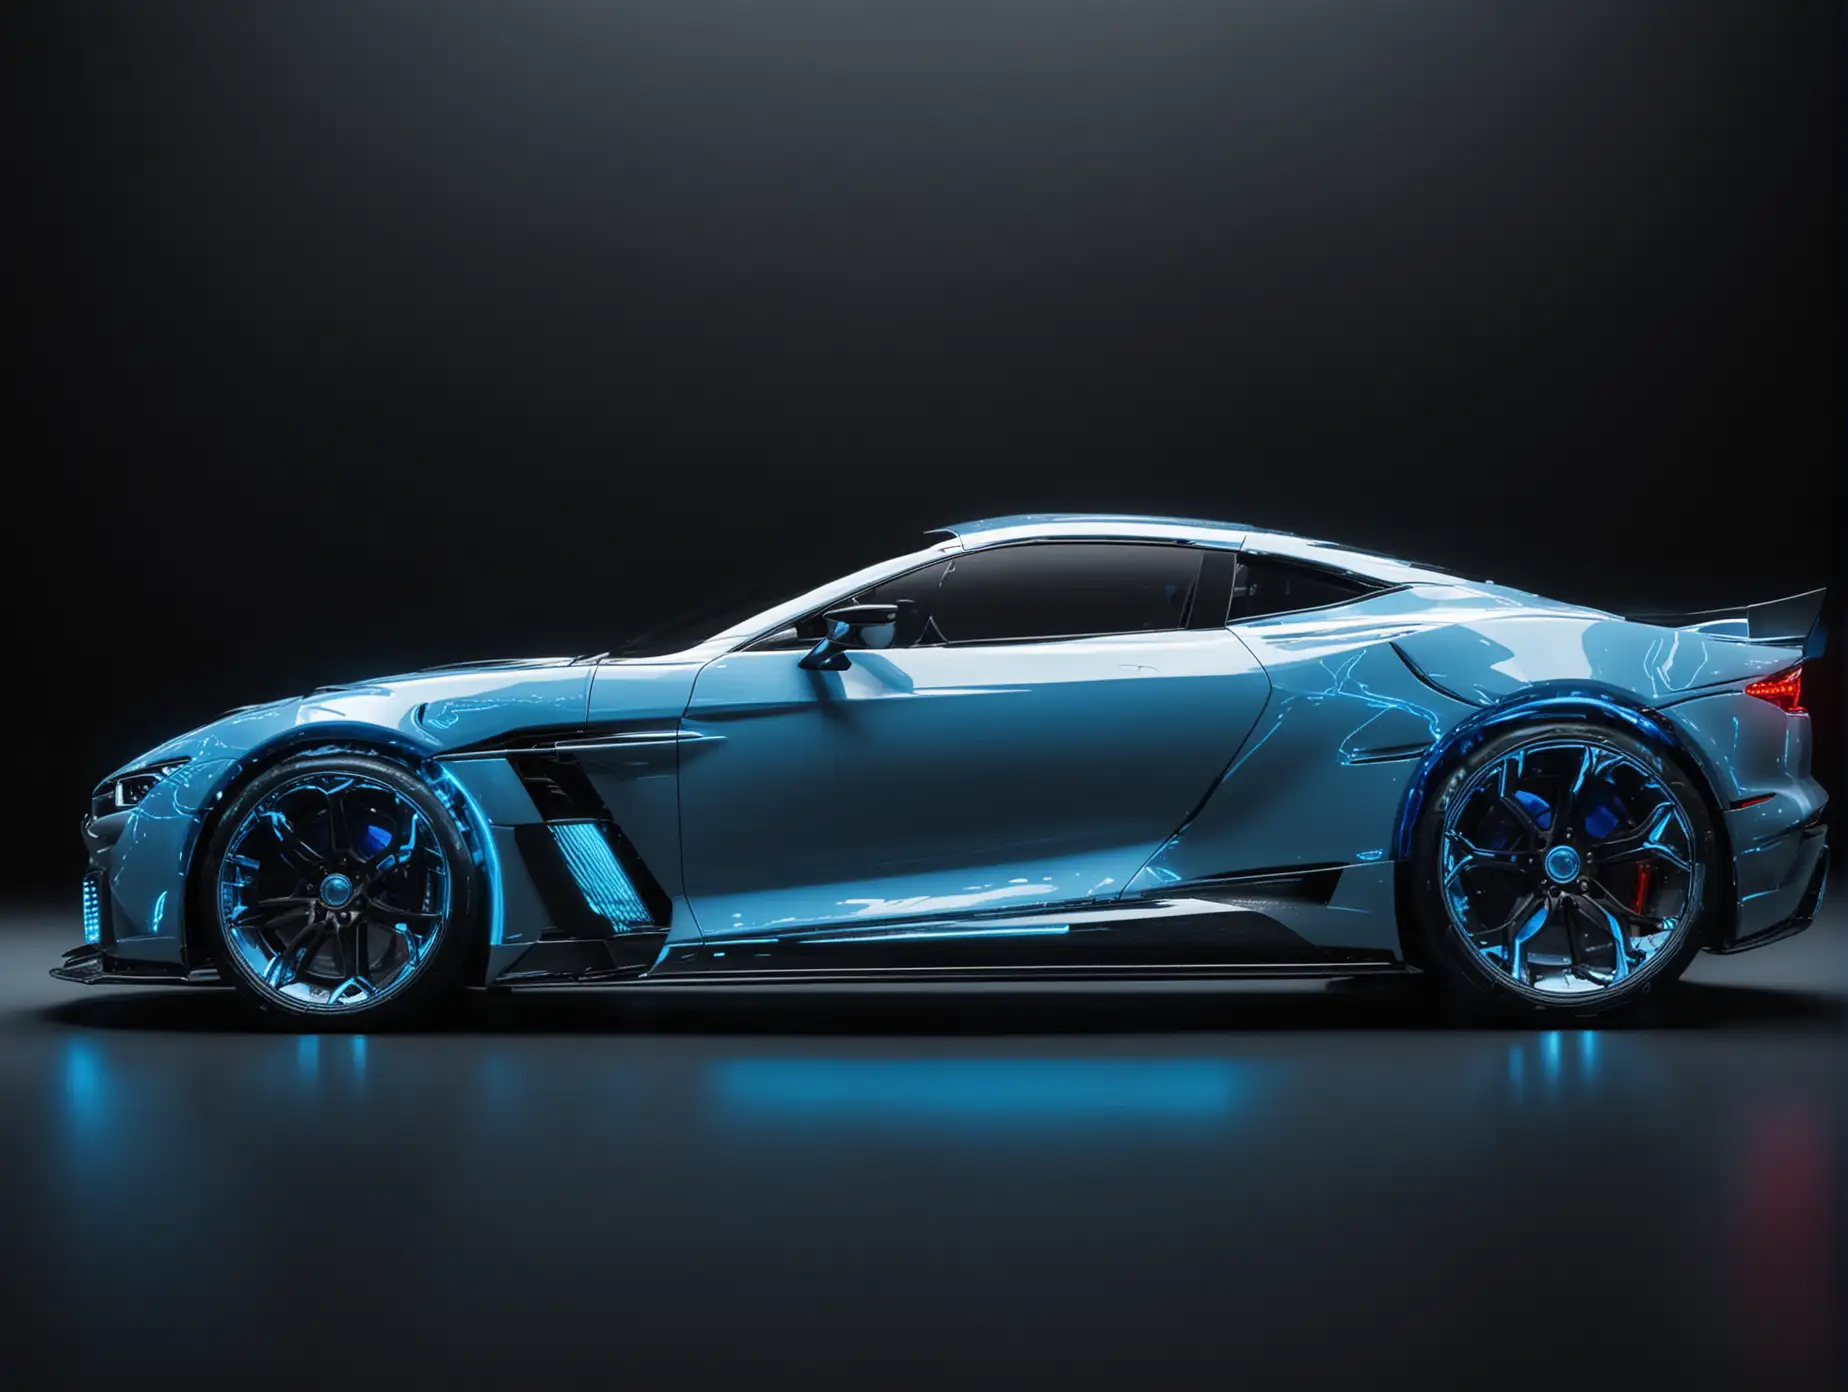 futuristic luxury sports car in vivid colors seen from the side on a black background, illuminated from below and above with blue-white lights